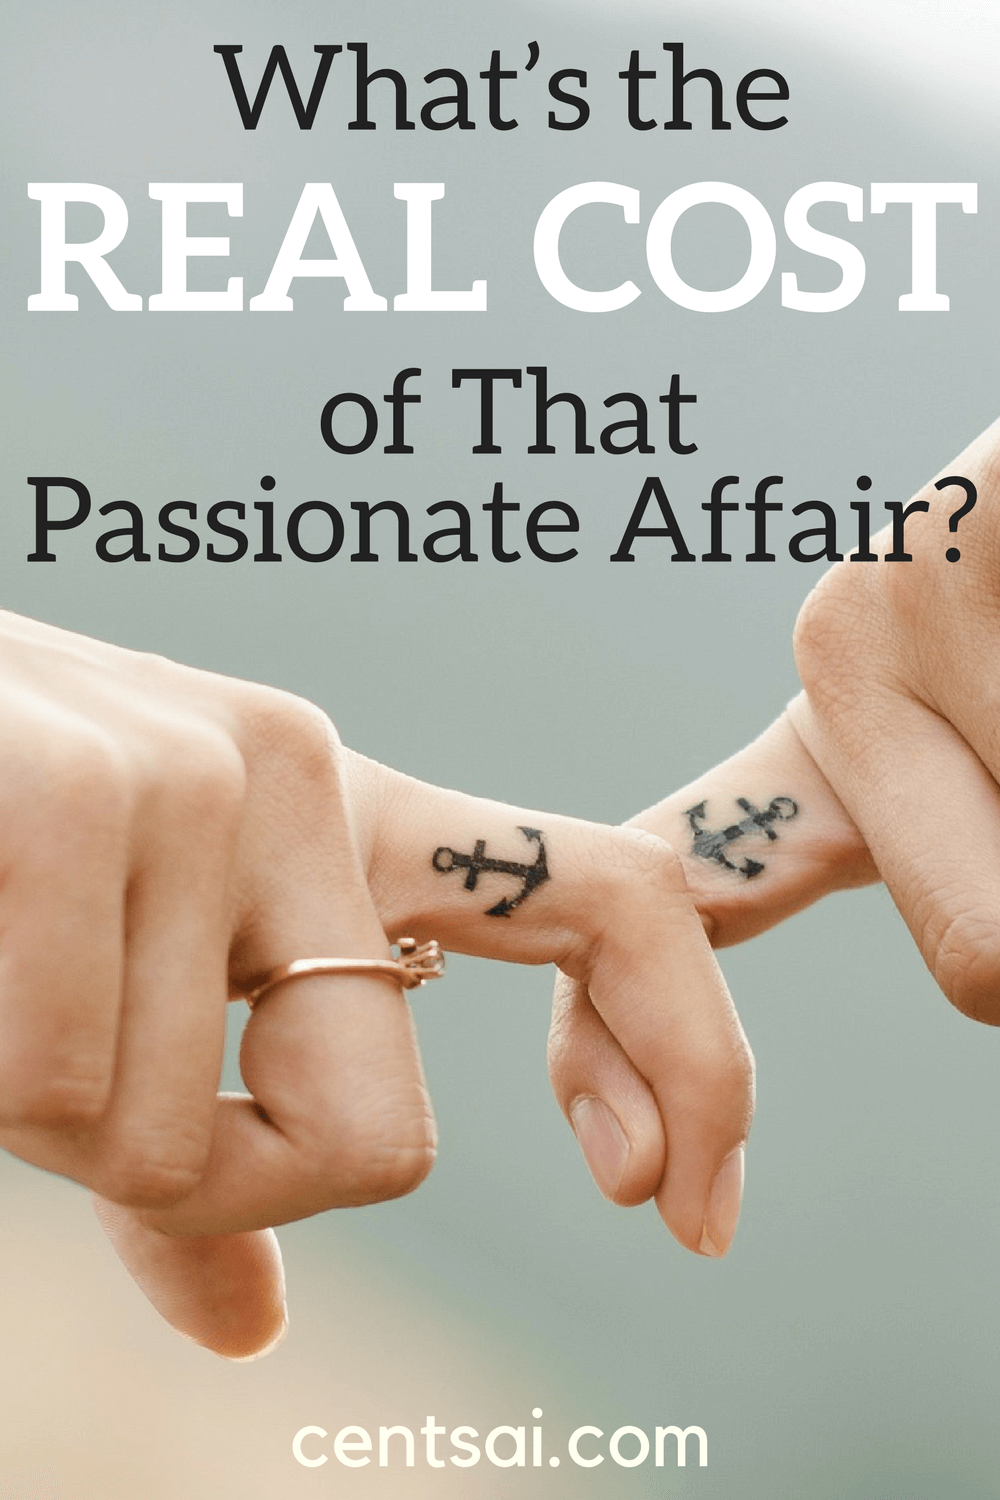 What’s the Real Cost of That Passionate Affair